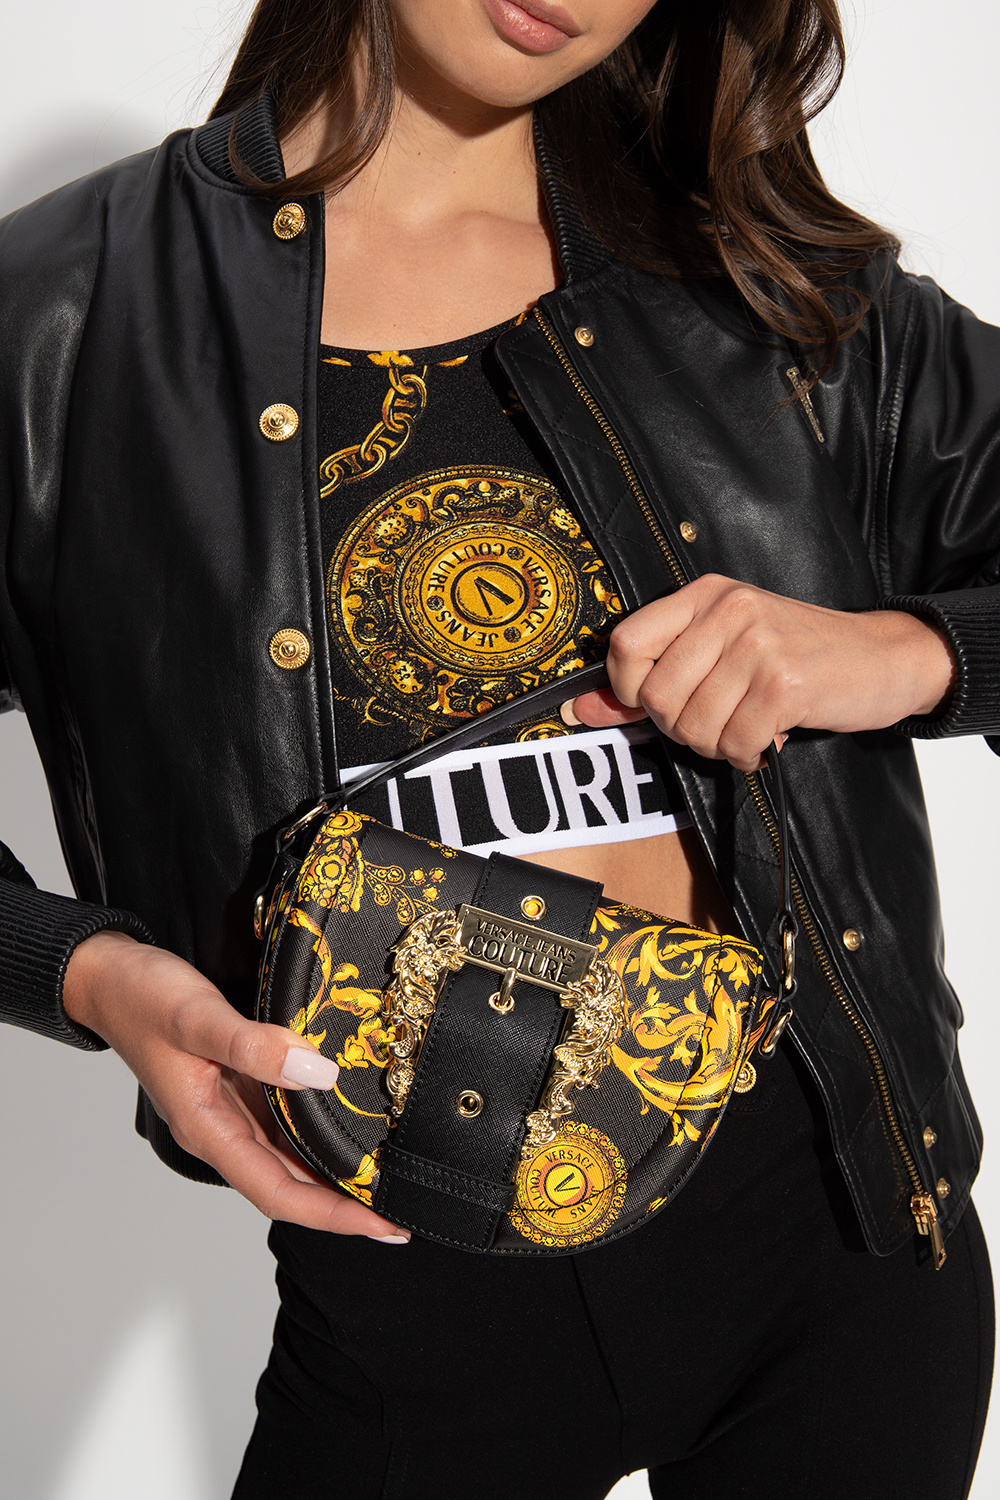 Versace Jeans Couture bag in textured synthetic leather